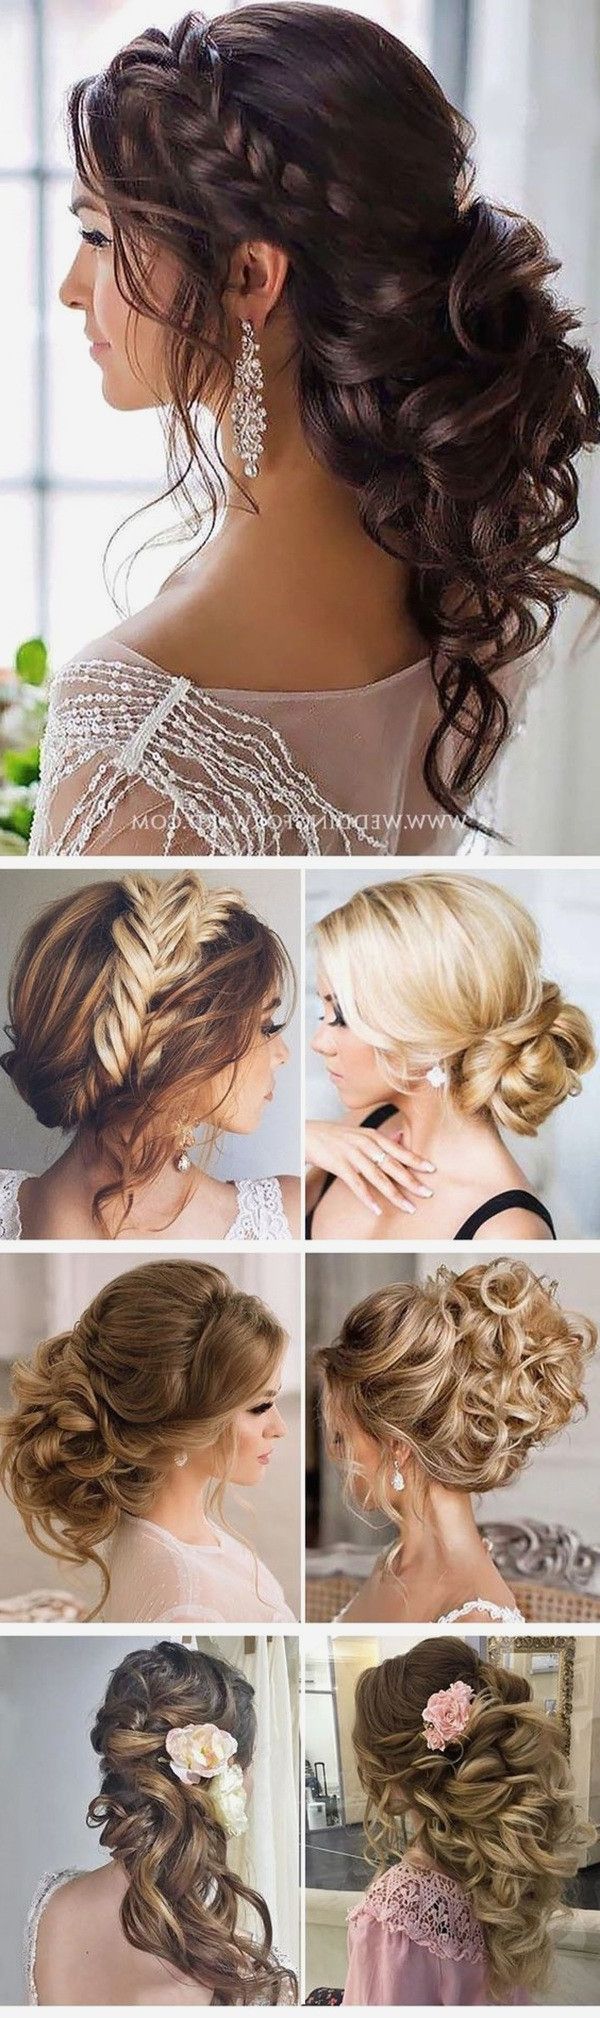 Wedding Hairstyles : Simple Wedding Bridal Hairstyles For Long Hair In Most Recently Released Simple Wedding Hairstyles (View 14 of 15)